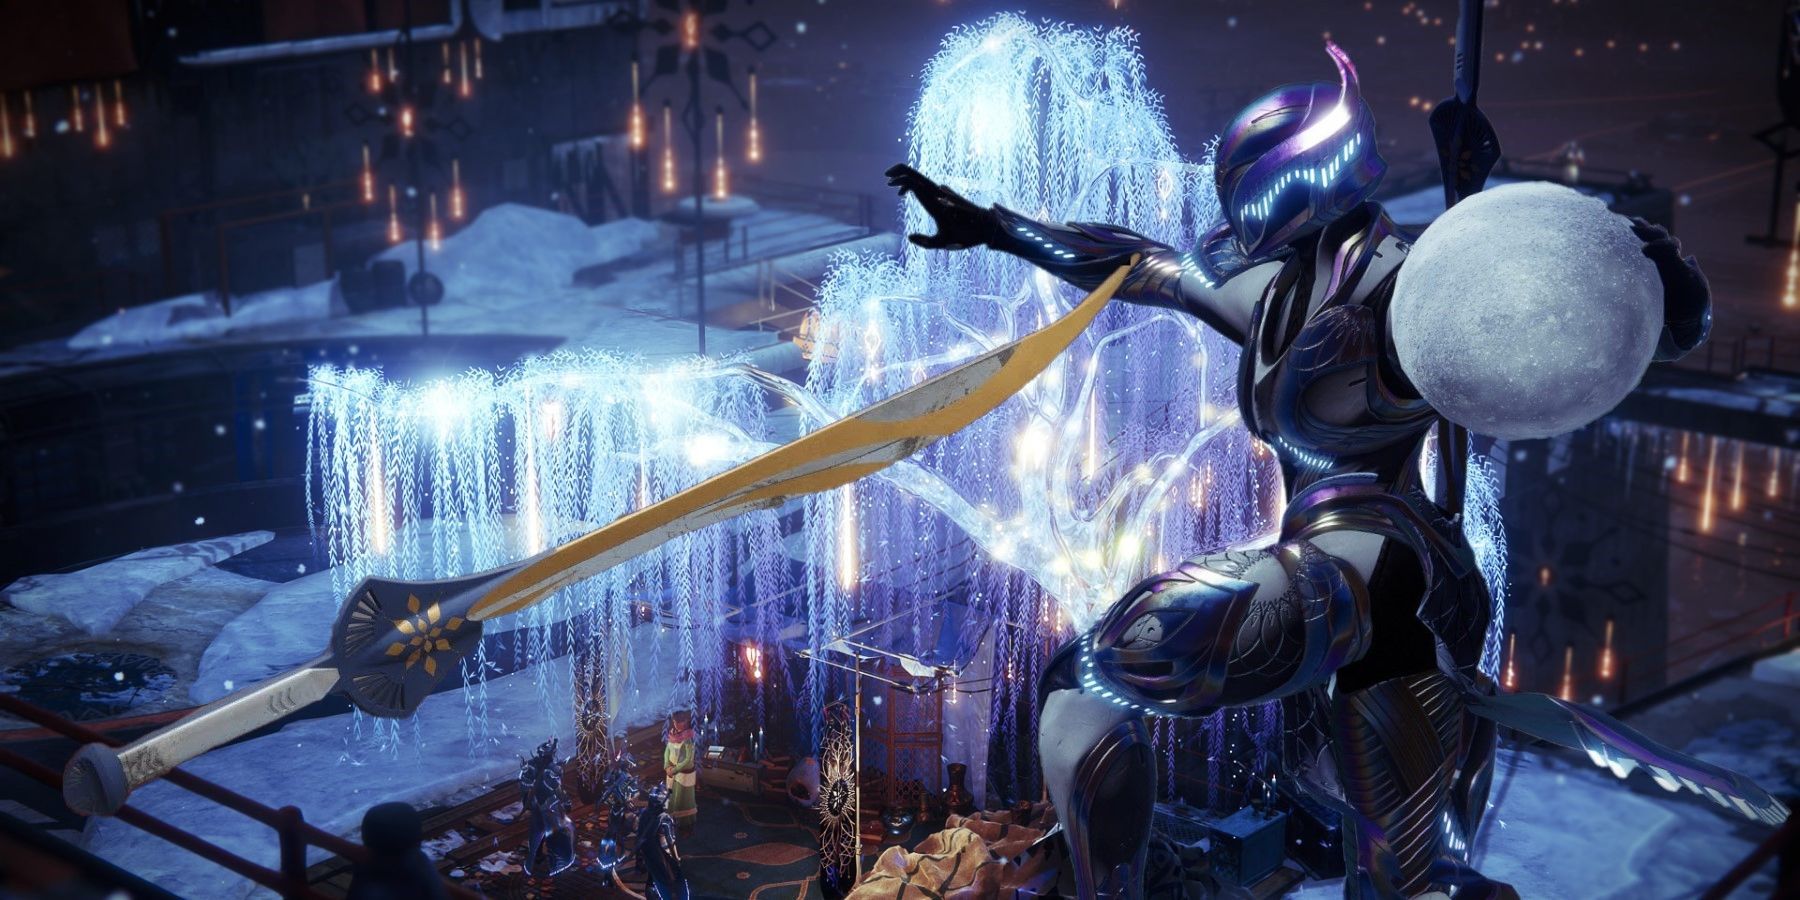 destiny 2 the dawning new zephyr legendary sword cold steel perk game-changer slow targets hit with powered attacks stasis stacks